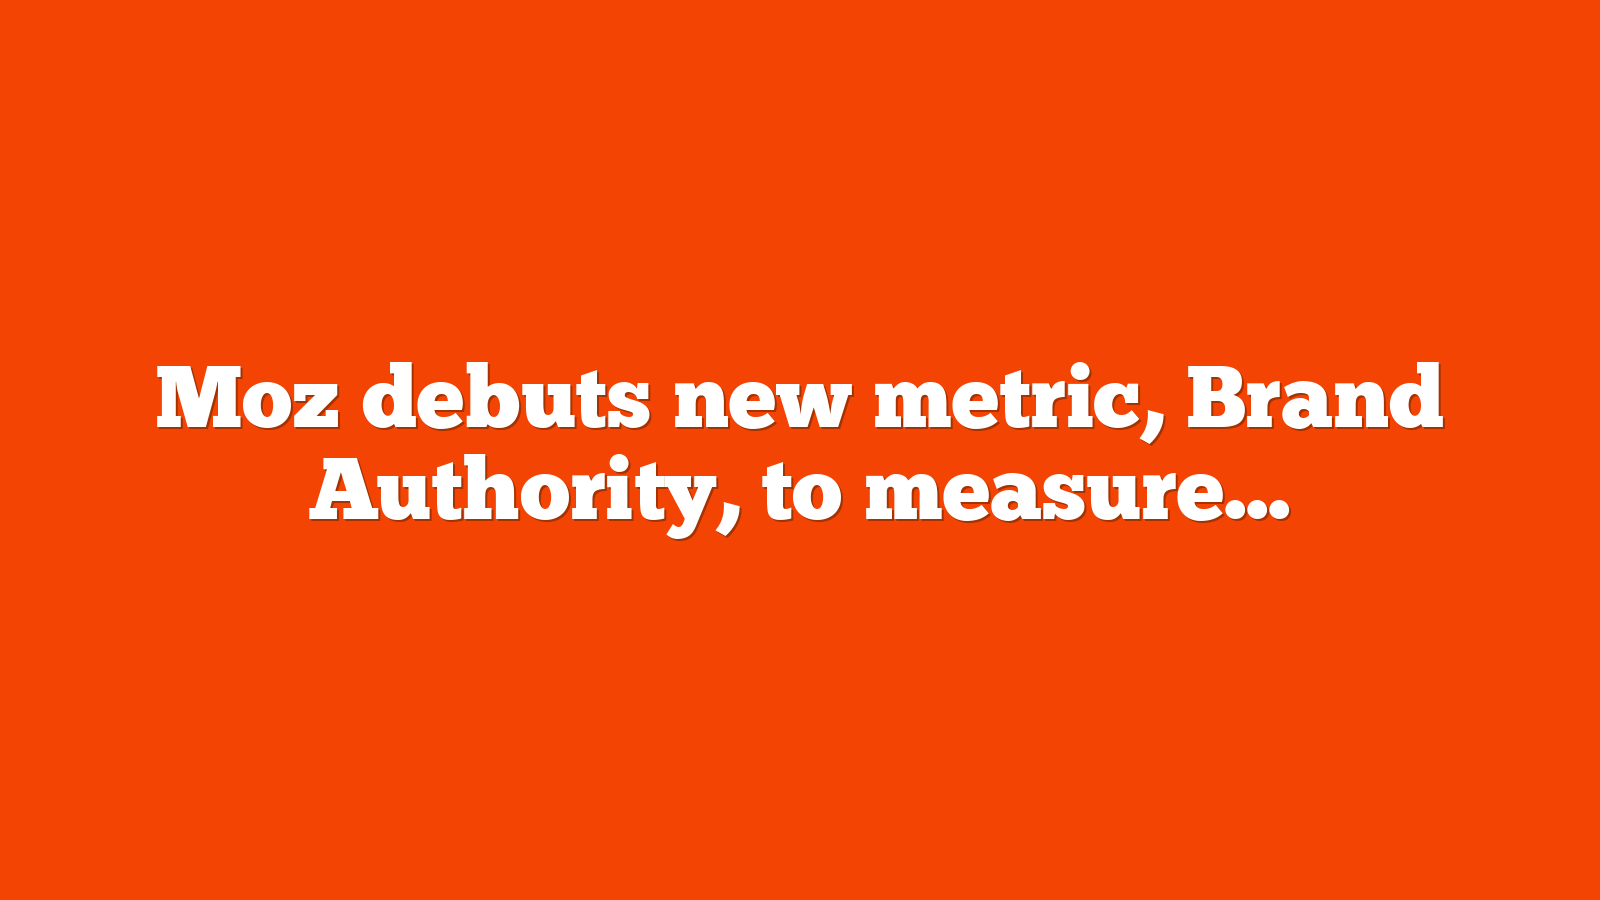 Moz debuts new metric, Brand Authority, to measure brand strength